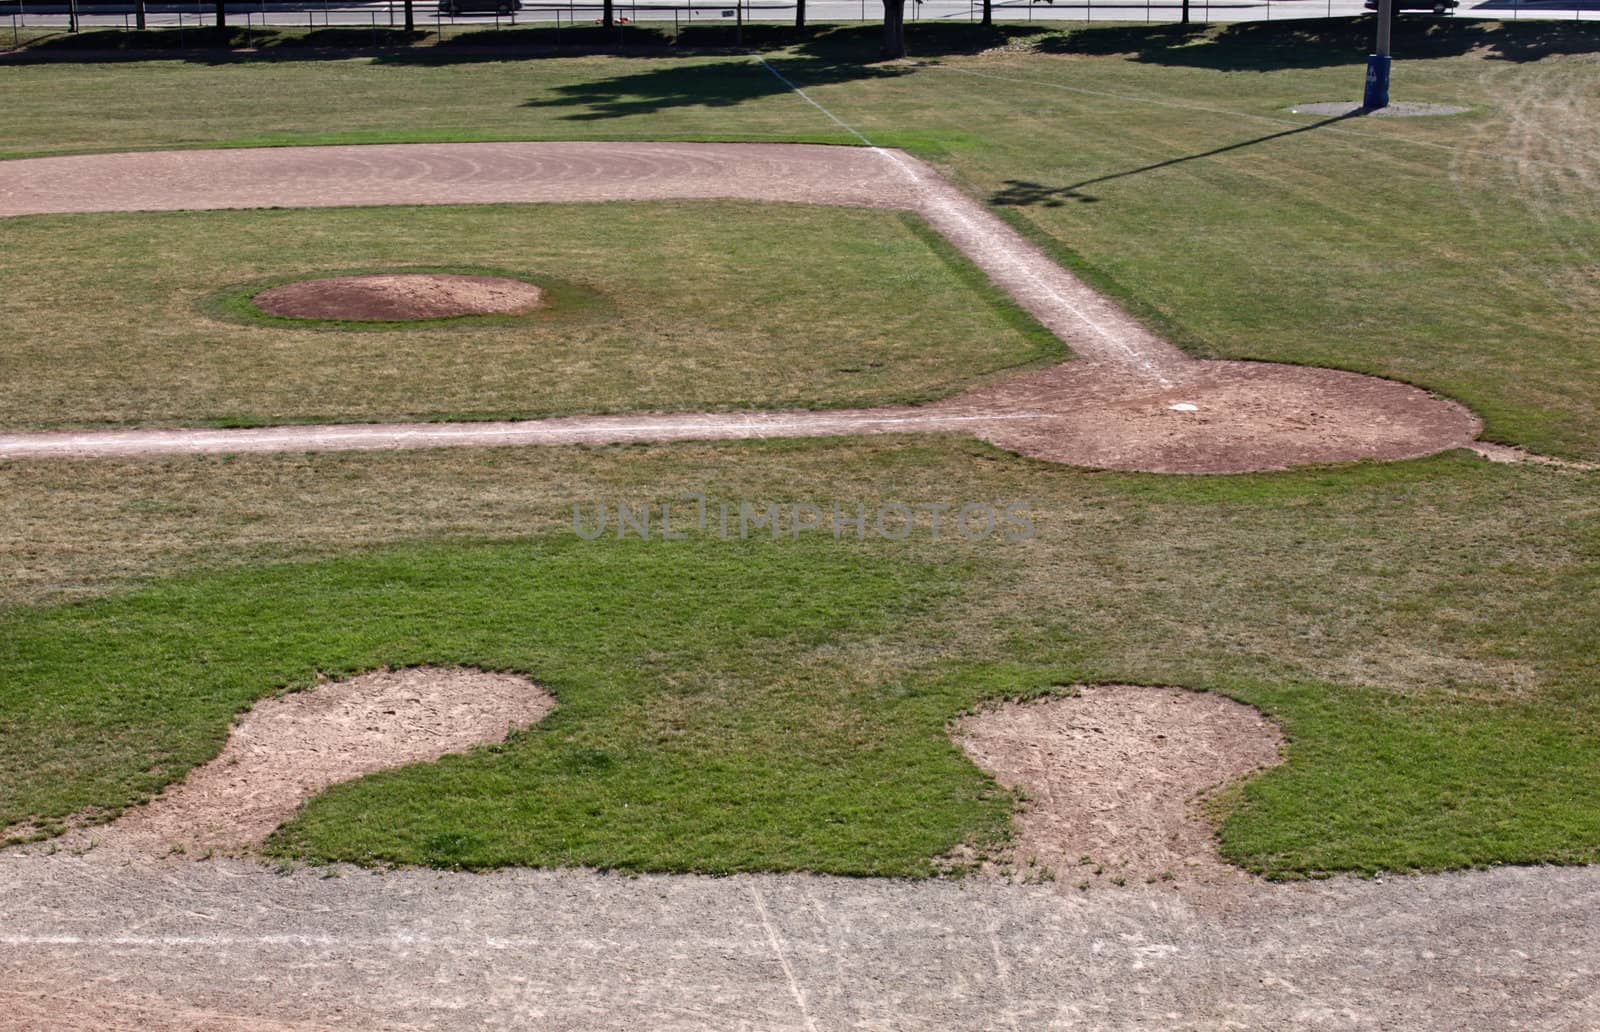 An unoccupied baseball field featuring on deck circles, shot from the bleachers.
